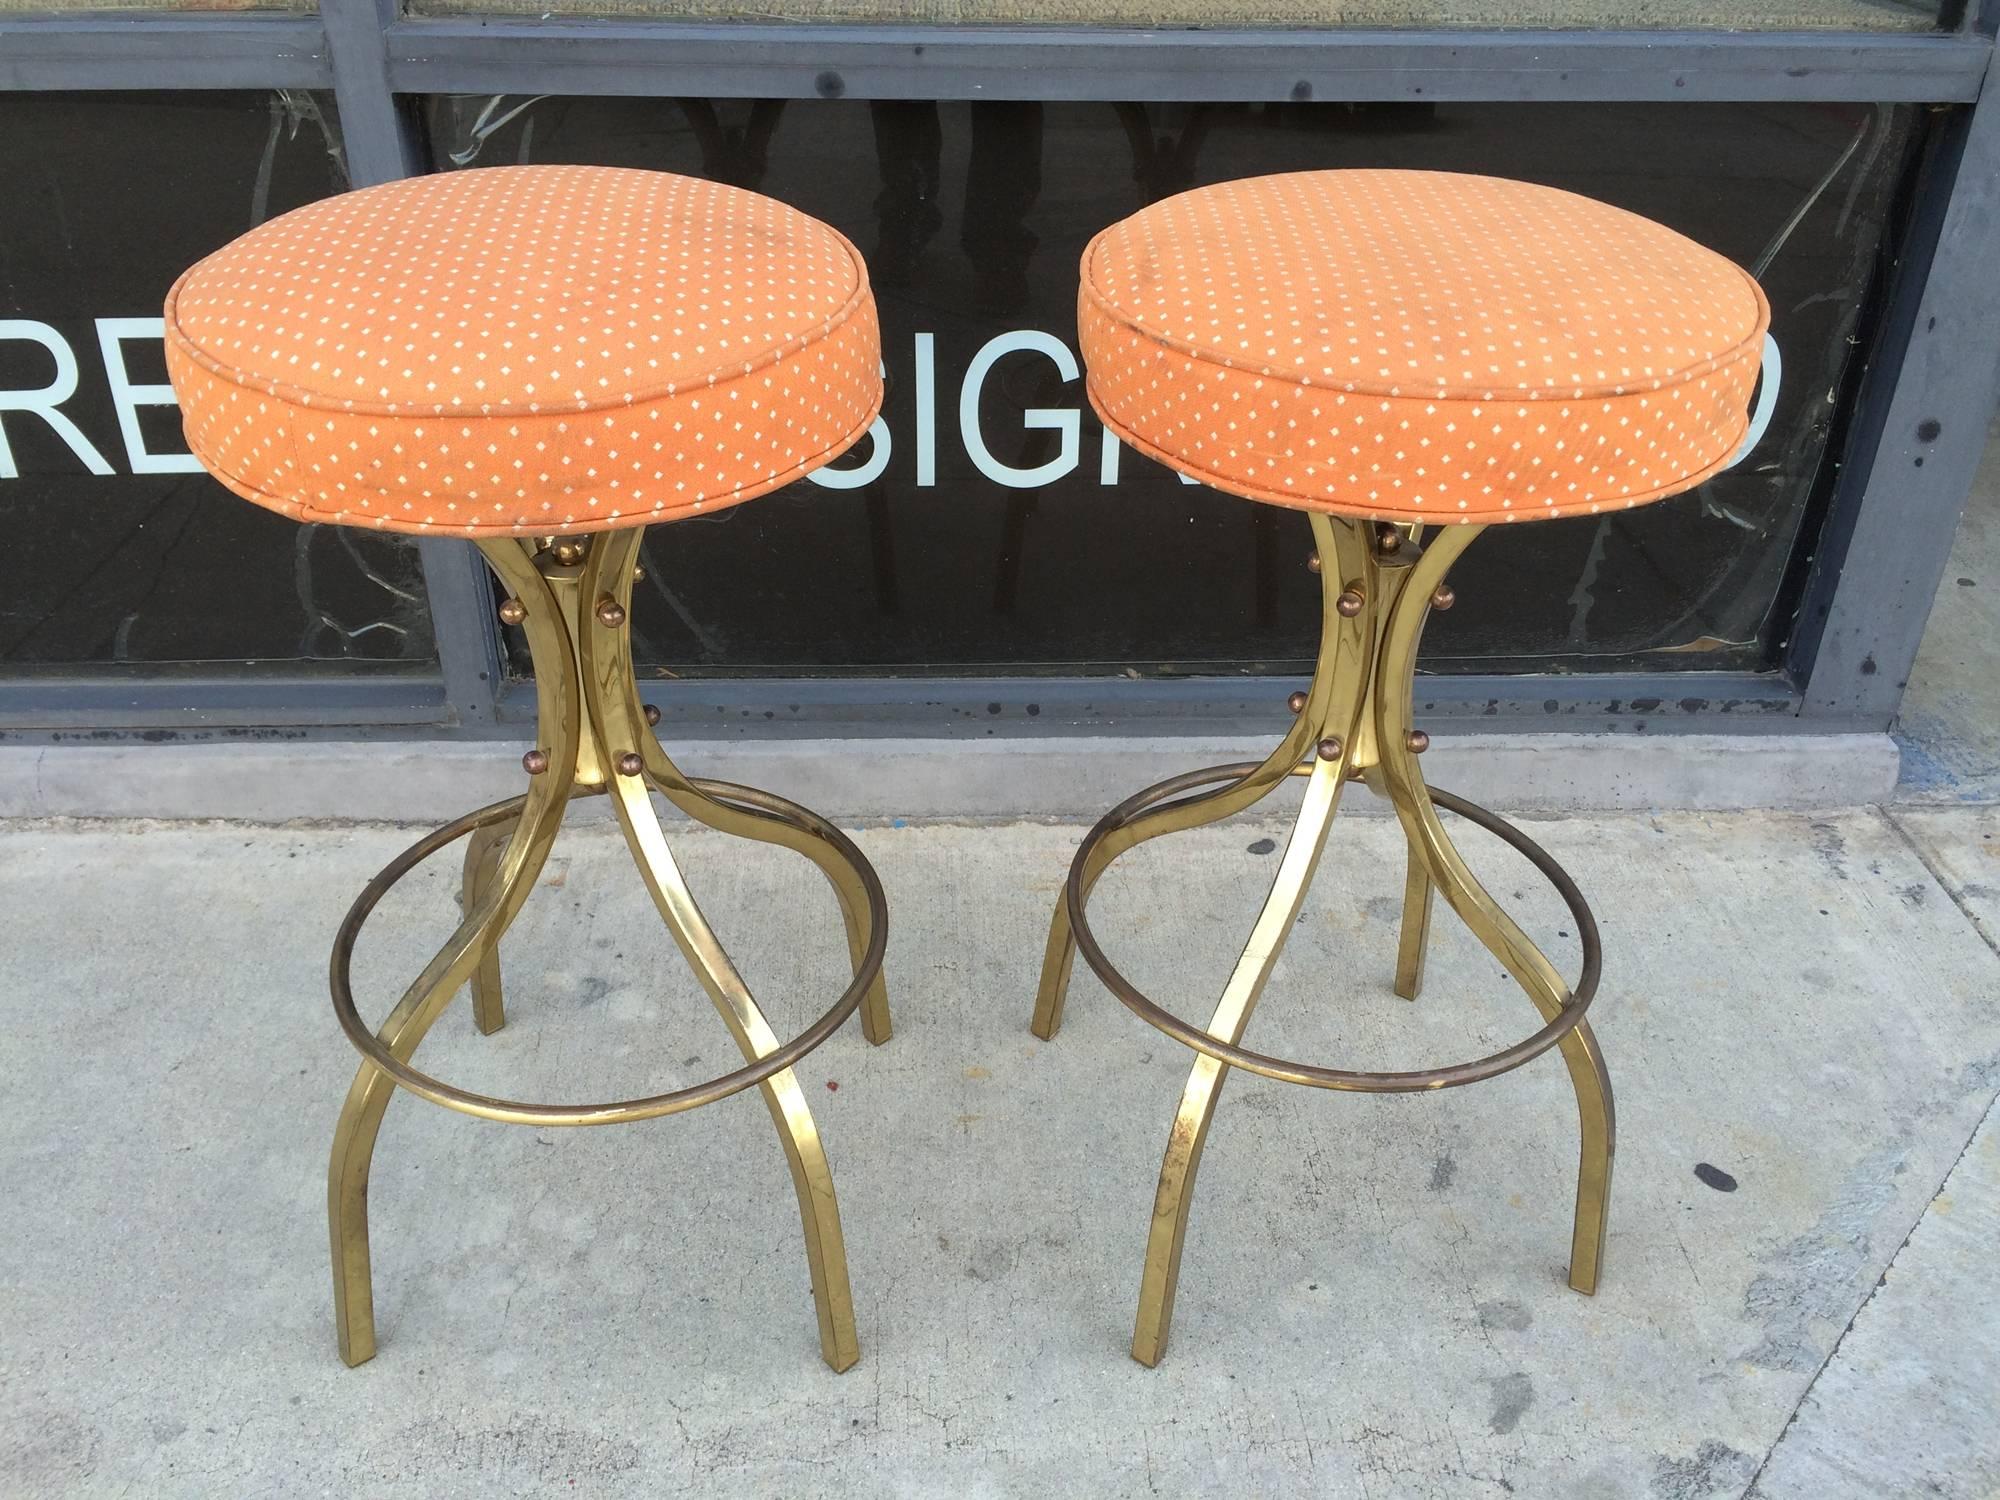 Rare pair of brass bar stools with swivel mechanism designed and manufactured by Charles Hollis Jones in the early 1960s.

The stools have great lines and are very comfortable, the swivel mechanism is smooth and works perfectly, the brass has a